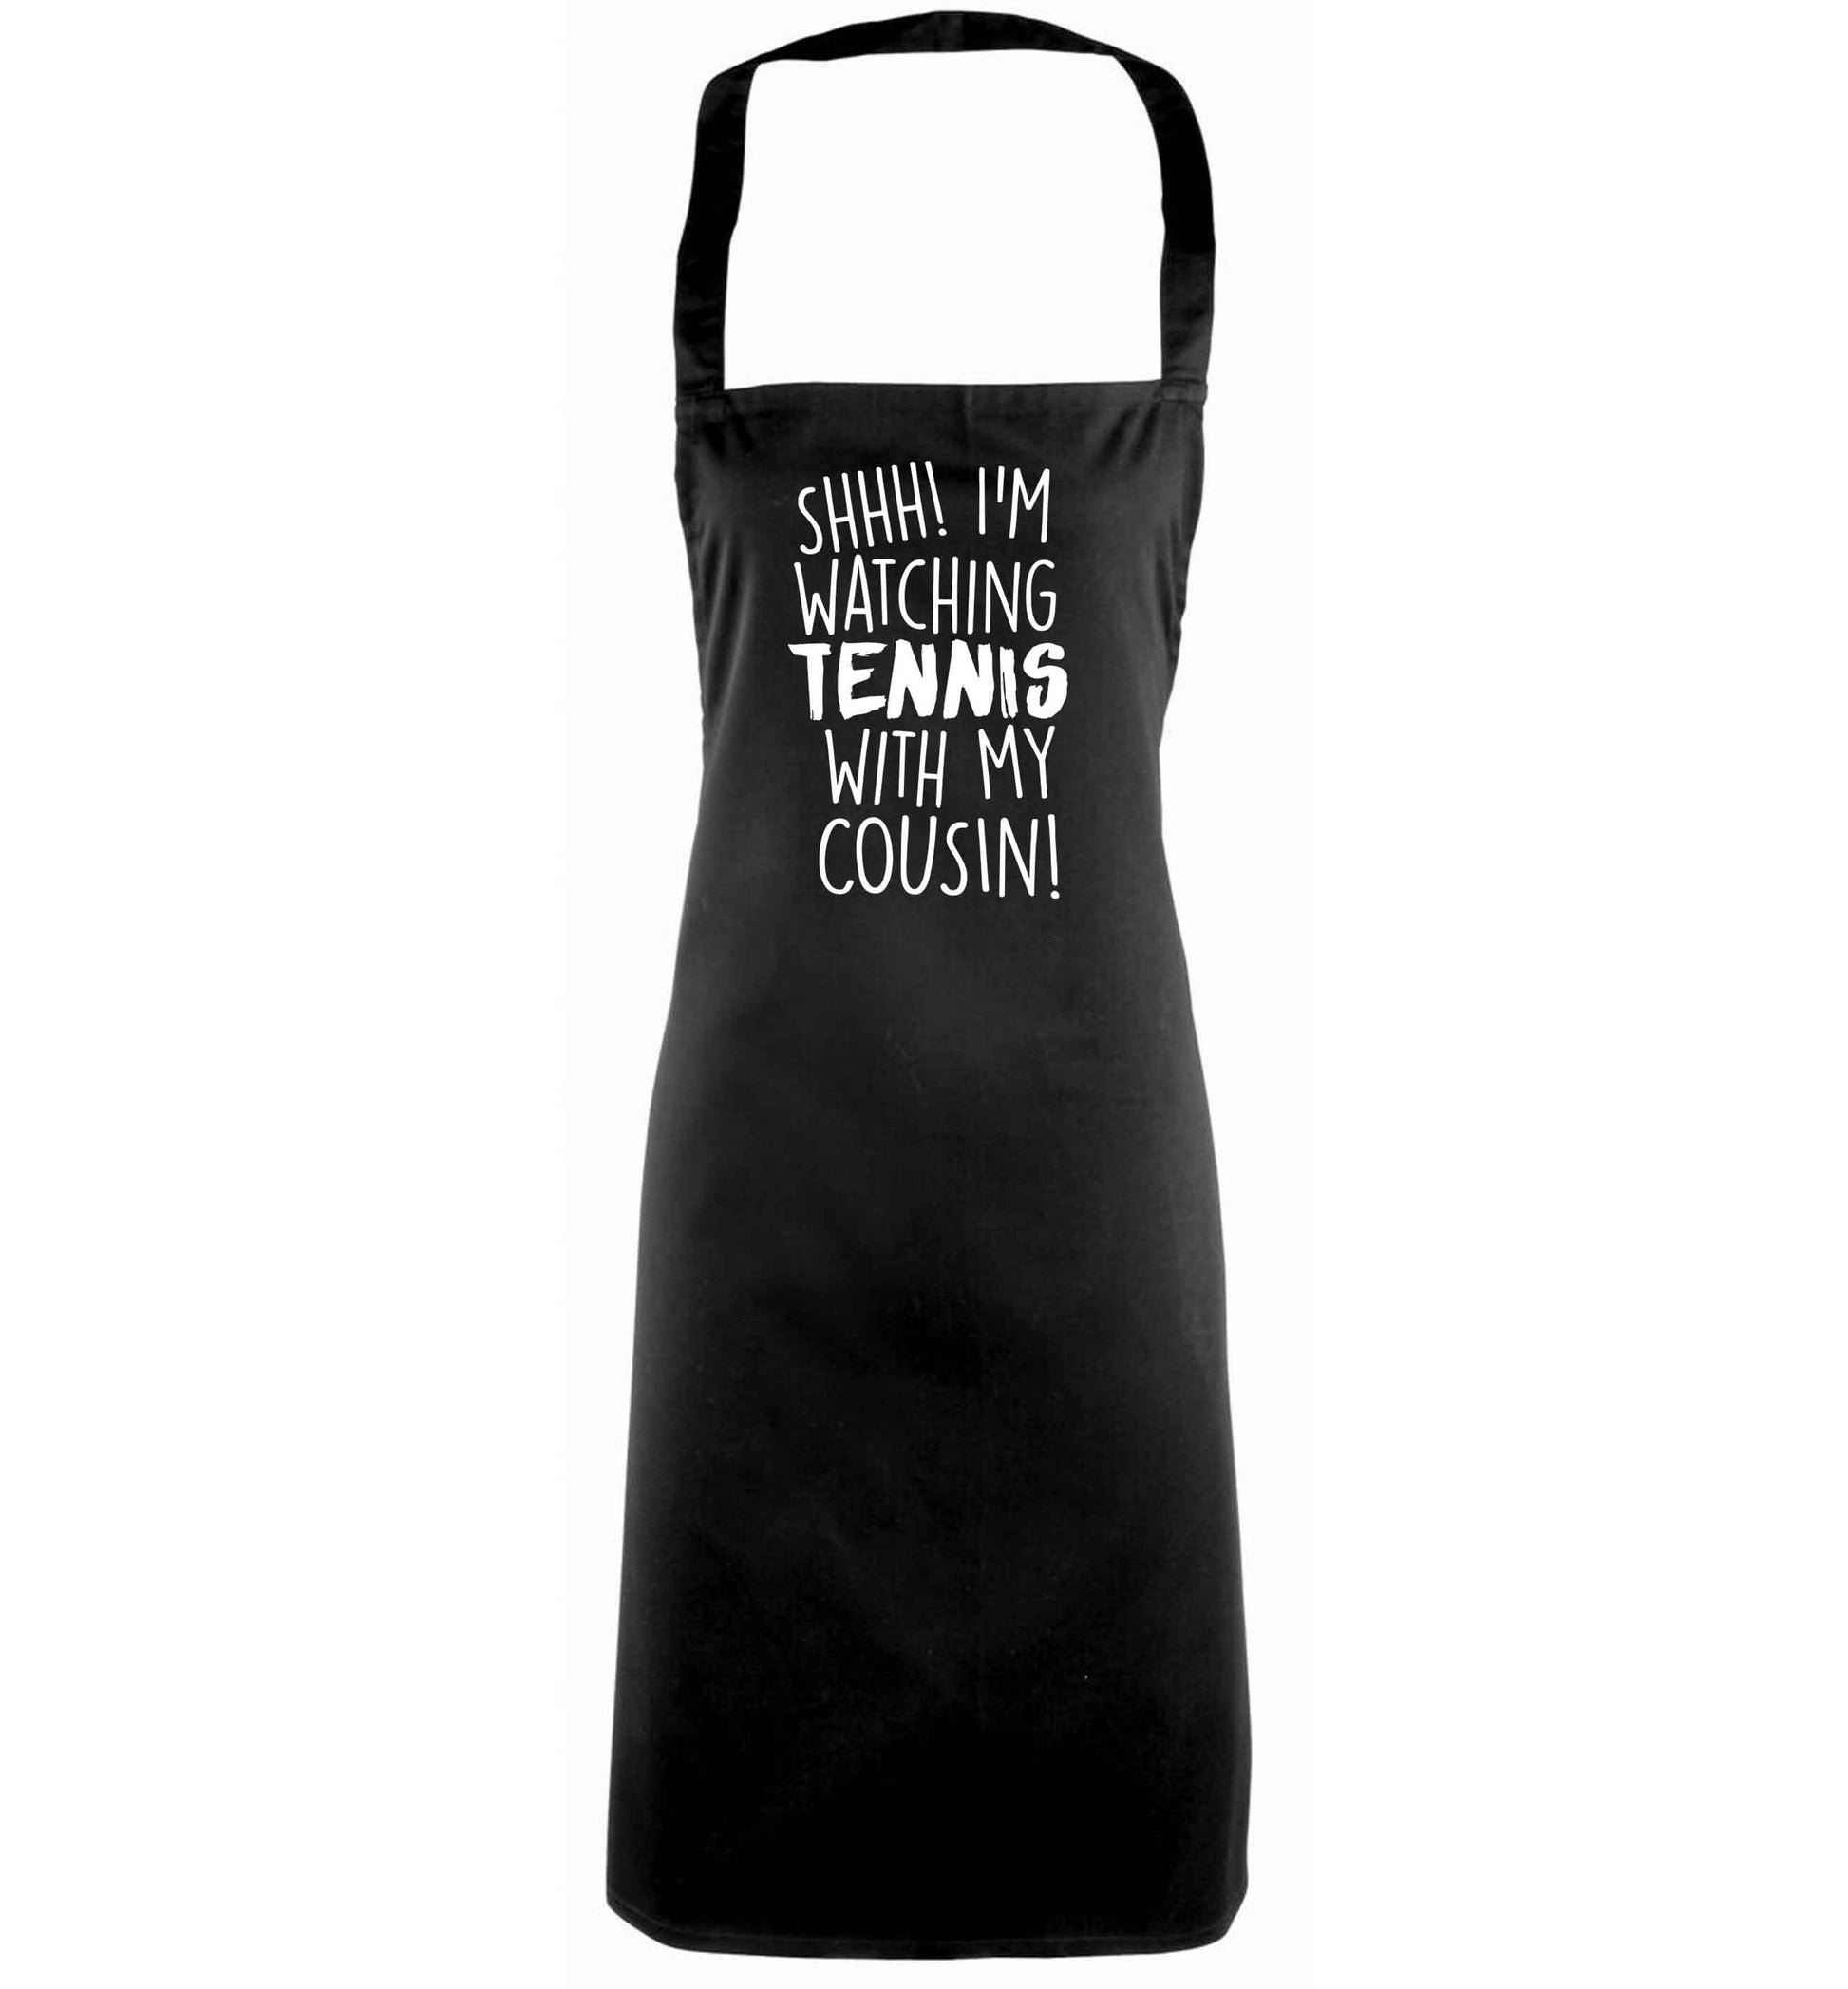 Shh! I'm watching tennis with my cousin! black apron